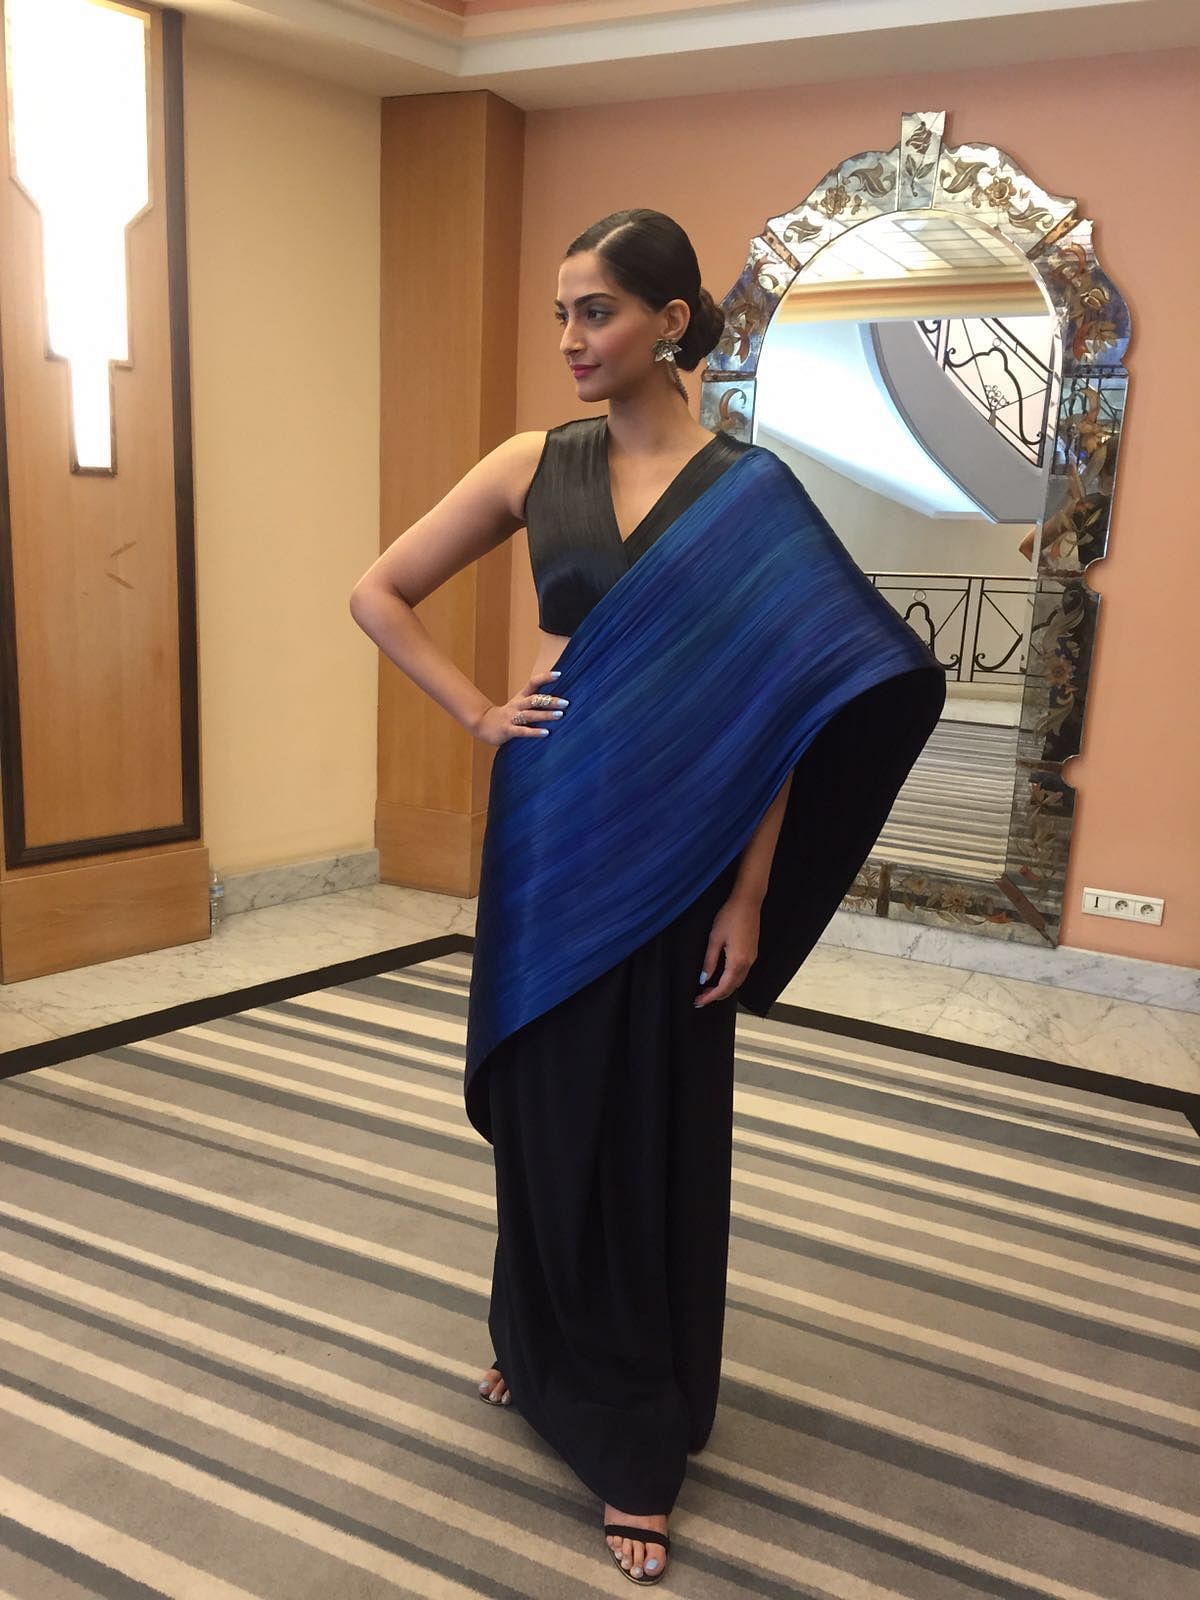 Sonam Kapoor is back and we’re already loving her style.